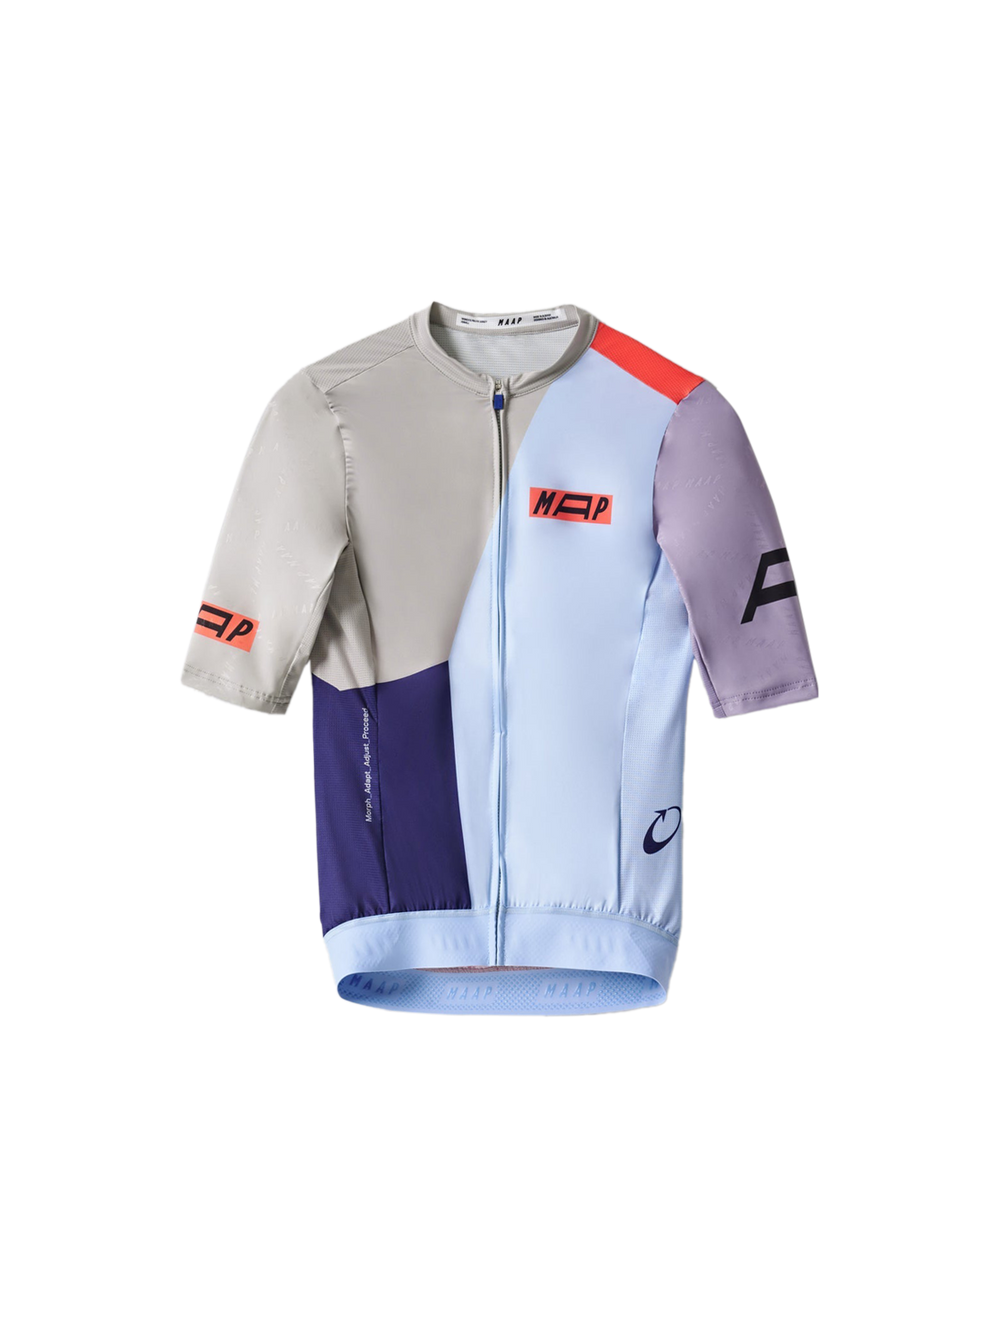 Product Image for Women's Form Pro Hex Jersey